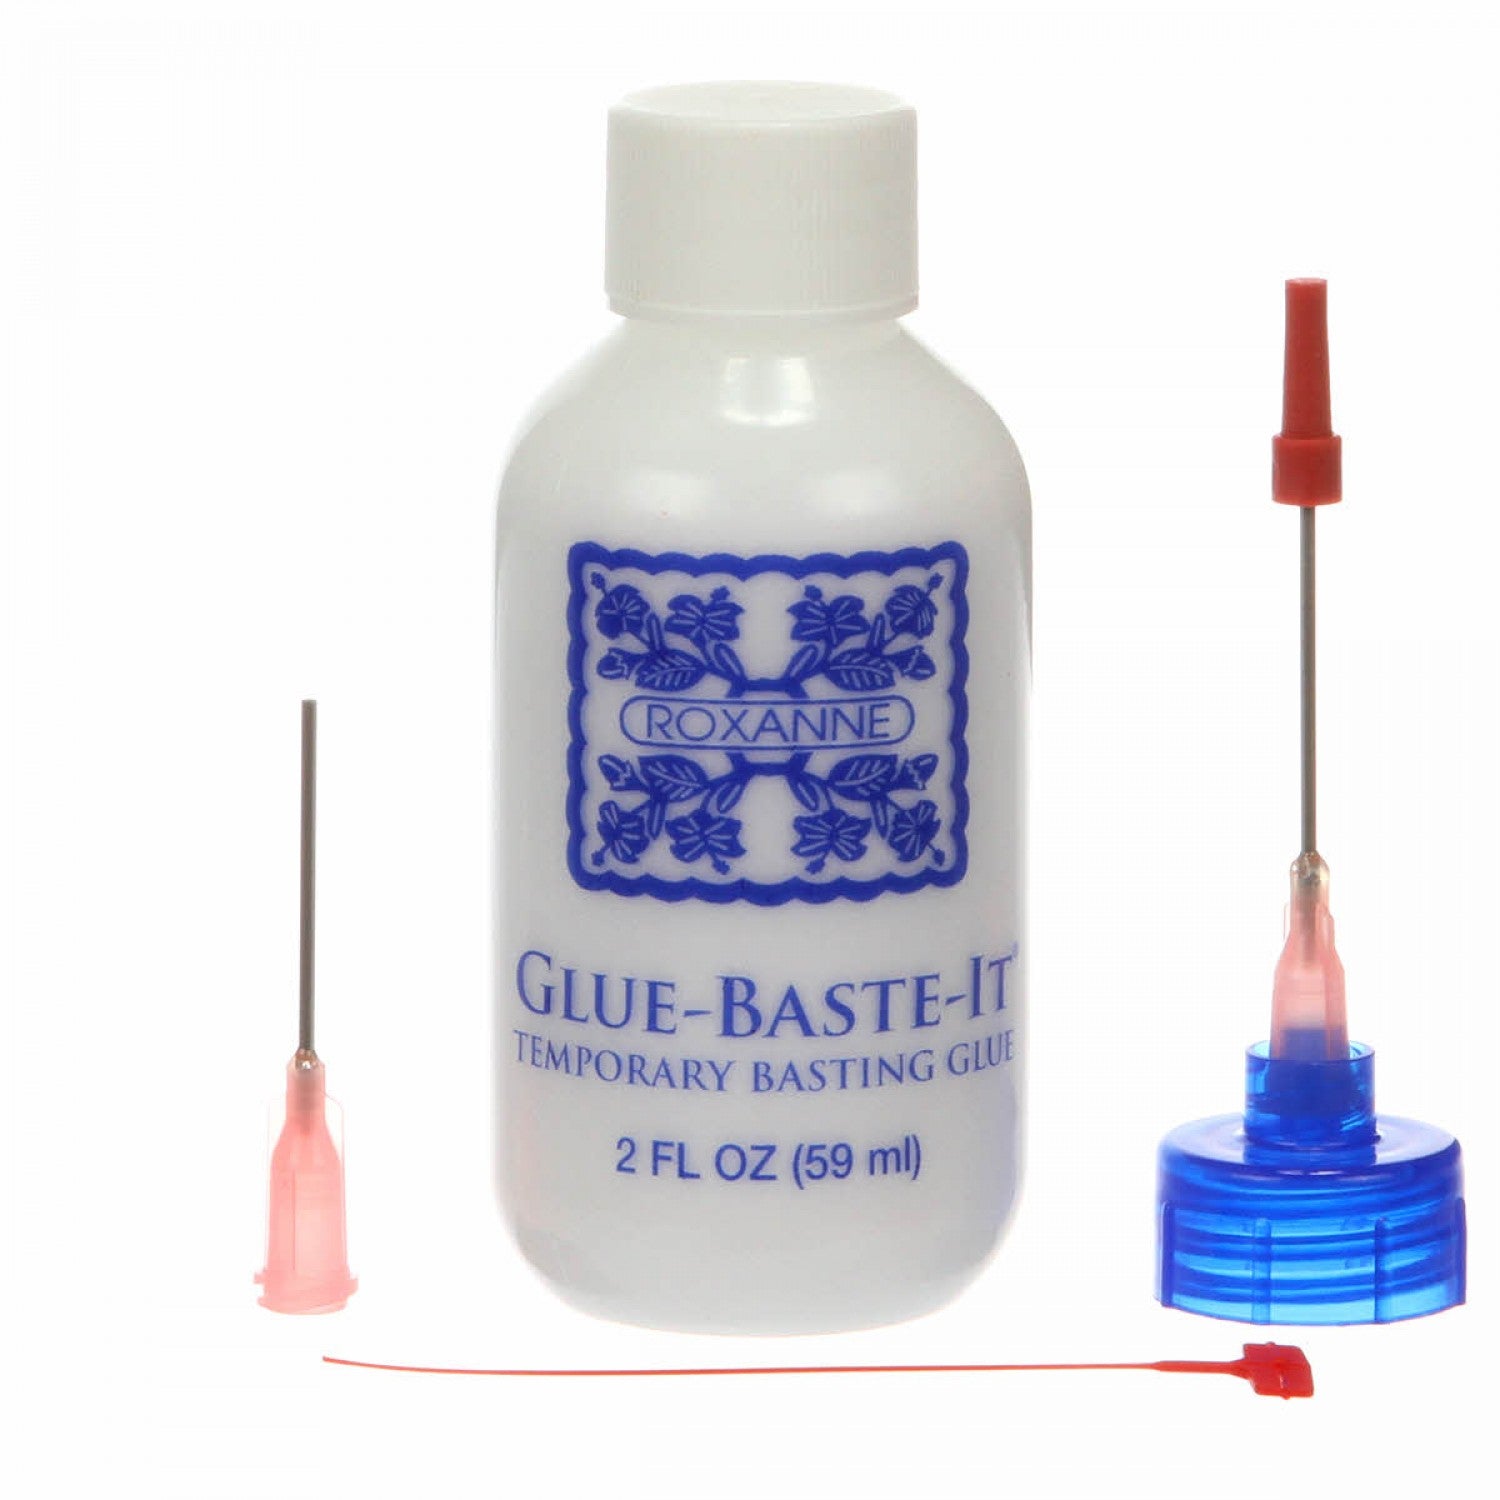 Glue-Baste-It - Temporary Adhesive by Roxanne